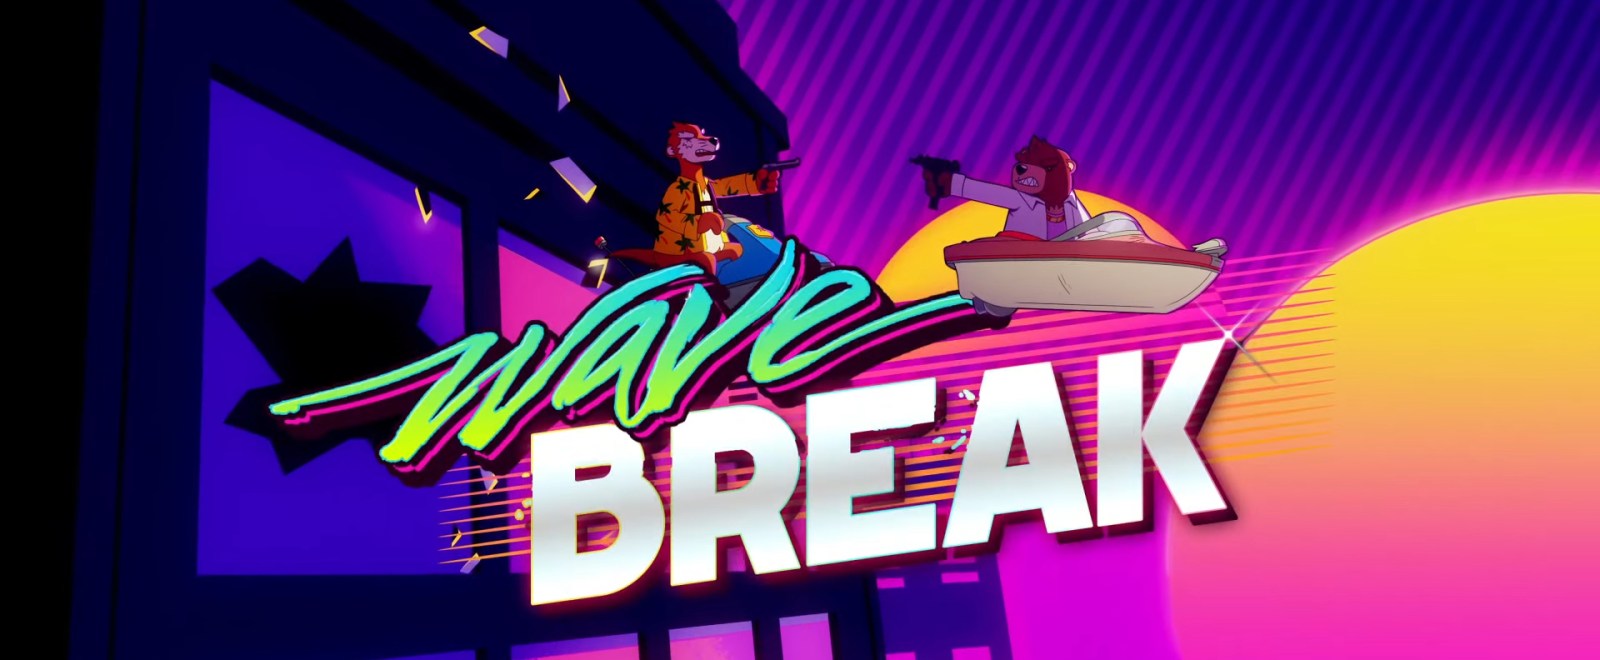 Wave Break Is The World S First Skateboating Game And It Looks Rad As Hell - id de musicas roblox funk oh juliana